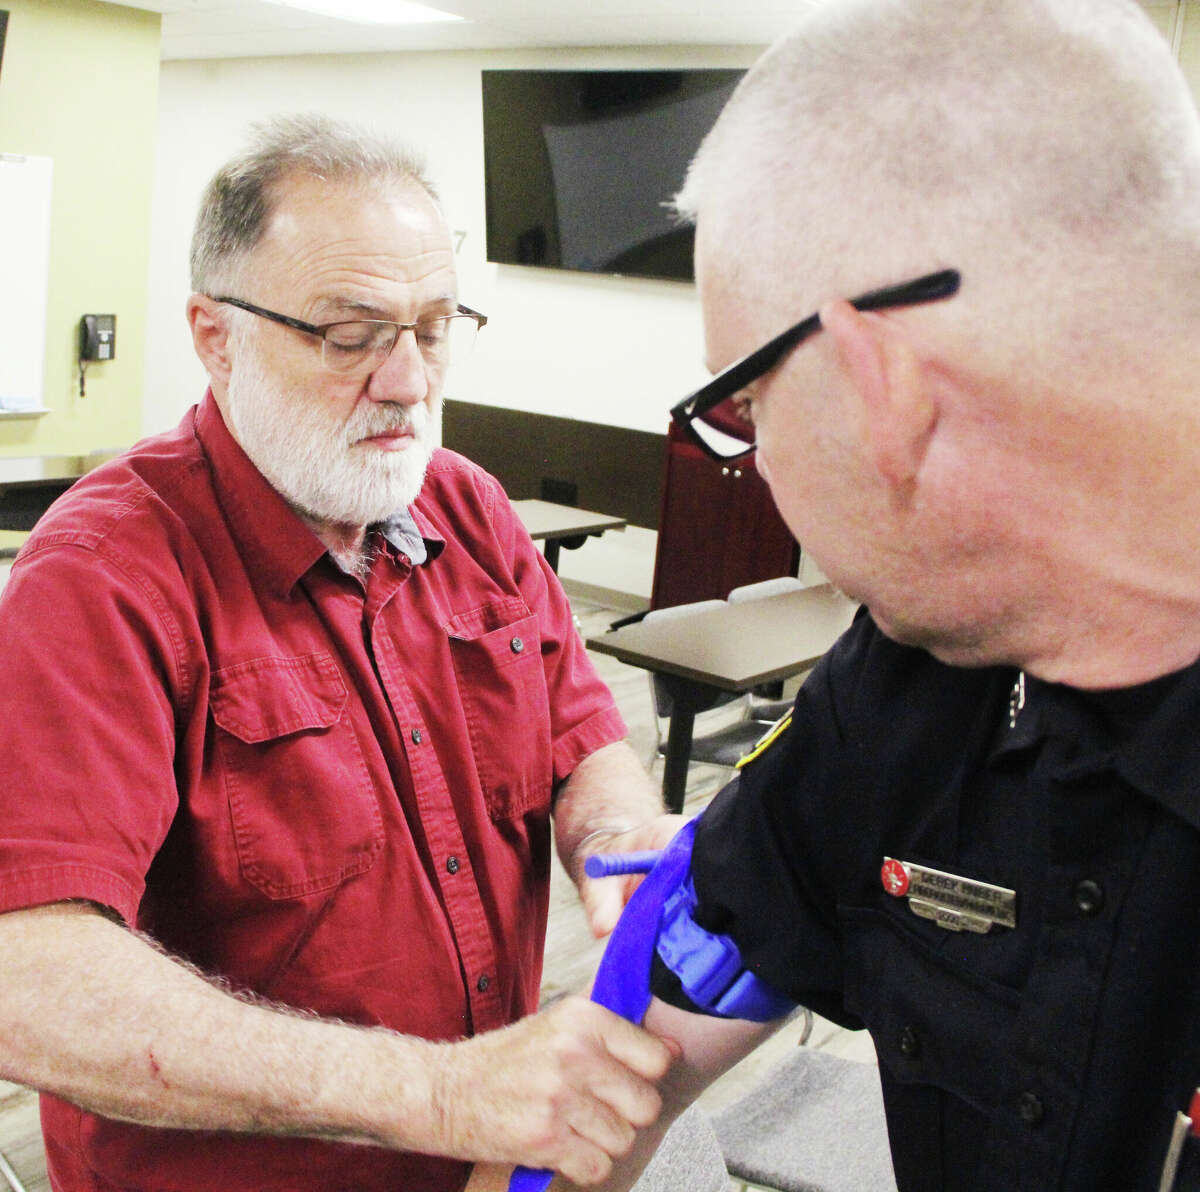 Jeff Graser, left, of Wood River, practices putting a tourniquet on Edwardsville Firefighter/Paramedic Derek Huber during a "Stop the Bleed" class Thursday at the Edwardsville Public Safety Building. May is "Stop the Bleed Month." The program is designed to teach people how to deal with excessive bleeding, which is a major cause of preventable death.